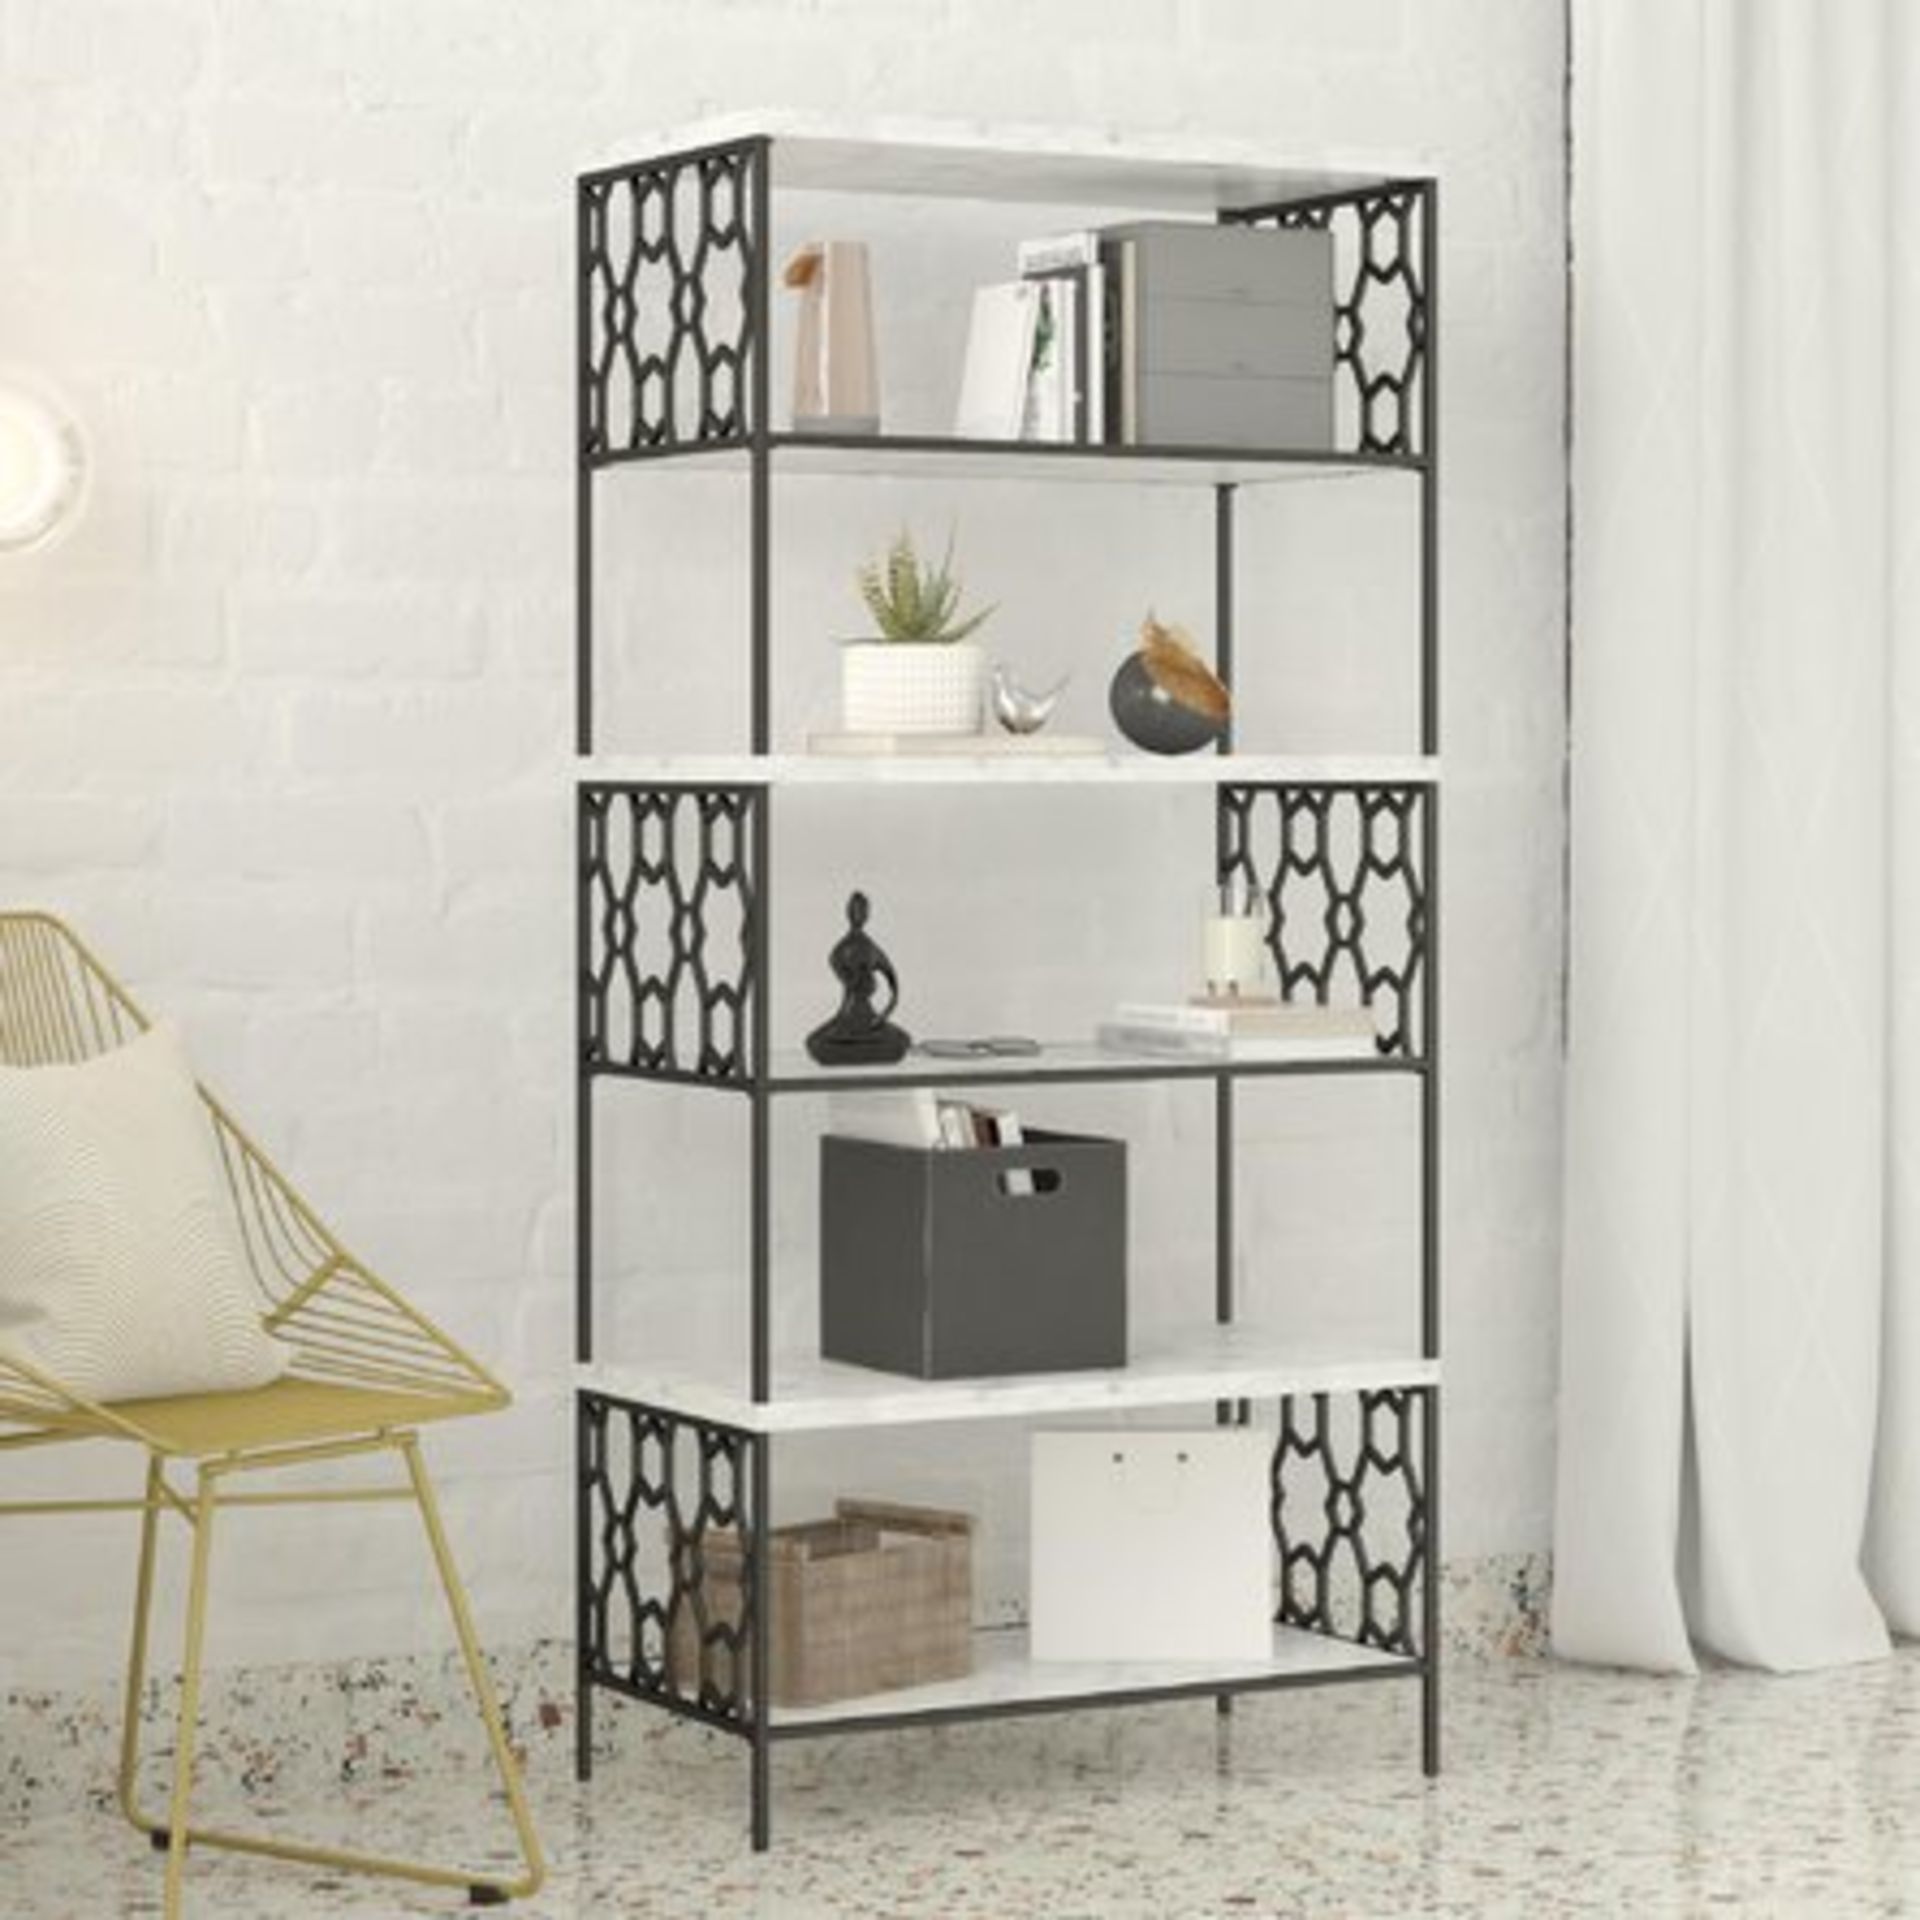 160Cm H x 75.4Cm W Steel Standard Bookcase BY COSMOPOLITAN LIVING RRP £349.99Condition